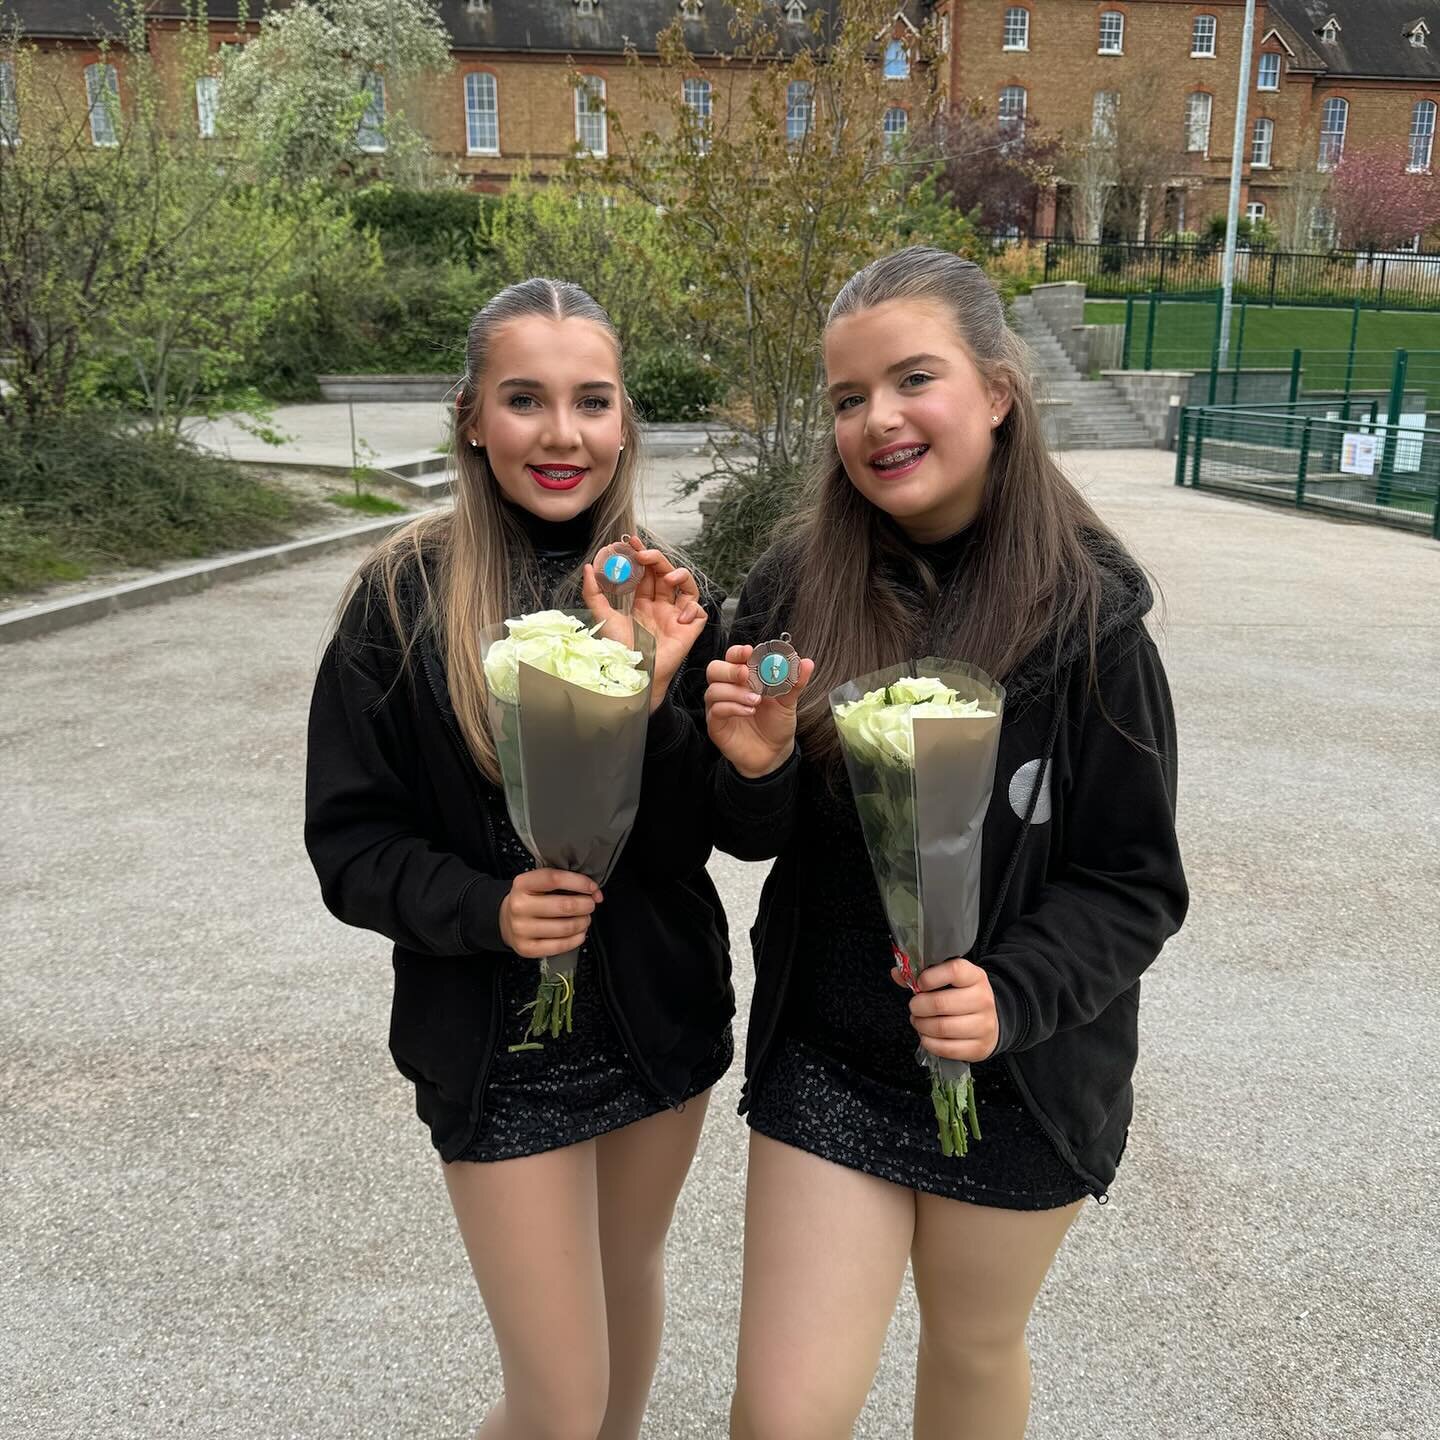 Two 3rd place medals at the Guildford Festival of Dance today! So proud of our girls - Layla, Chloe, Poppy &amp; Sadie - for dancing so beautifully, and being so wonderful. 🌟🫶🏼